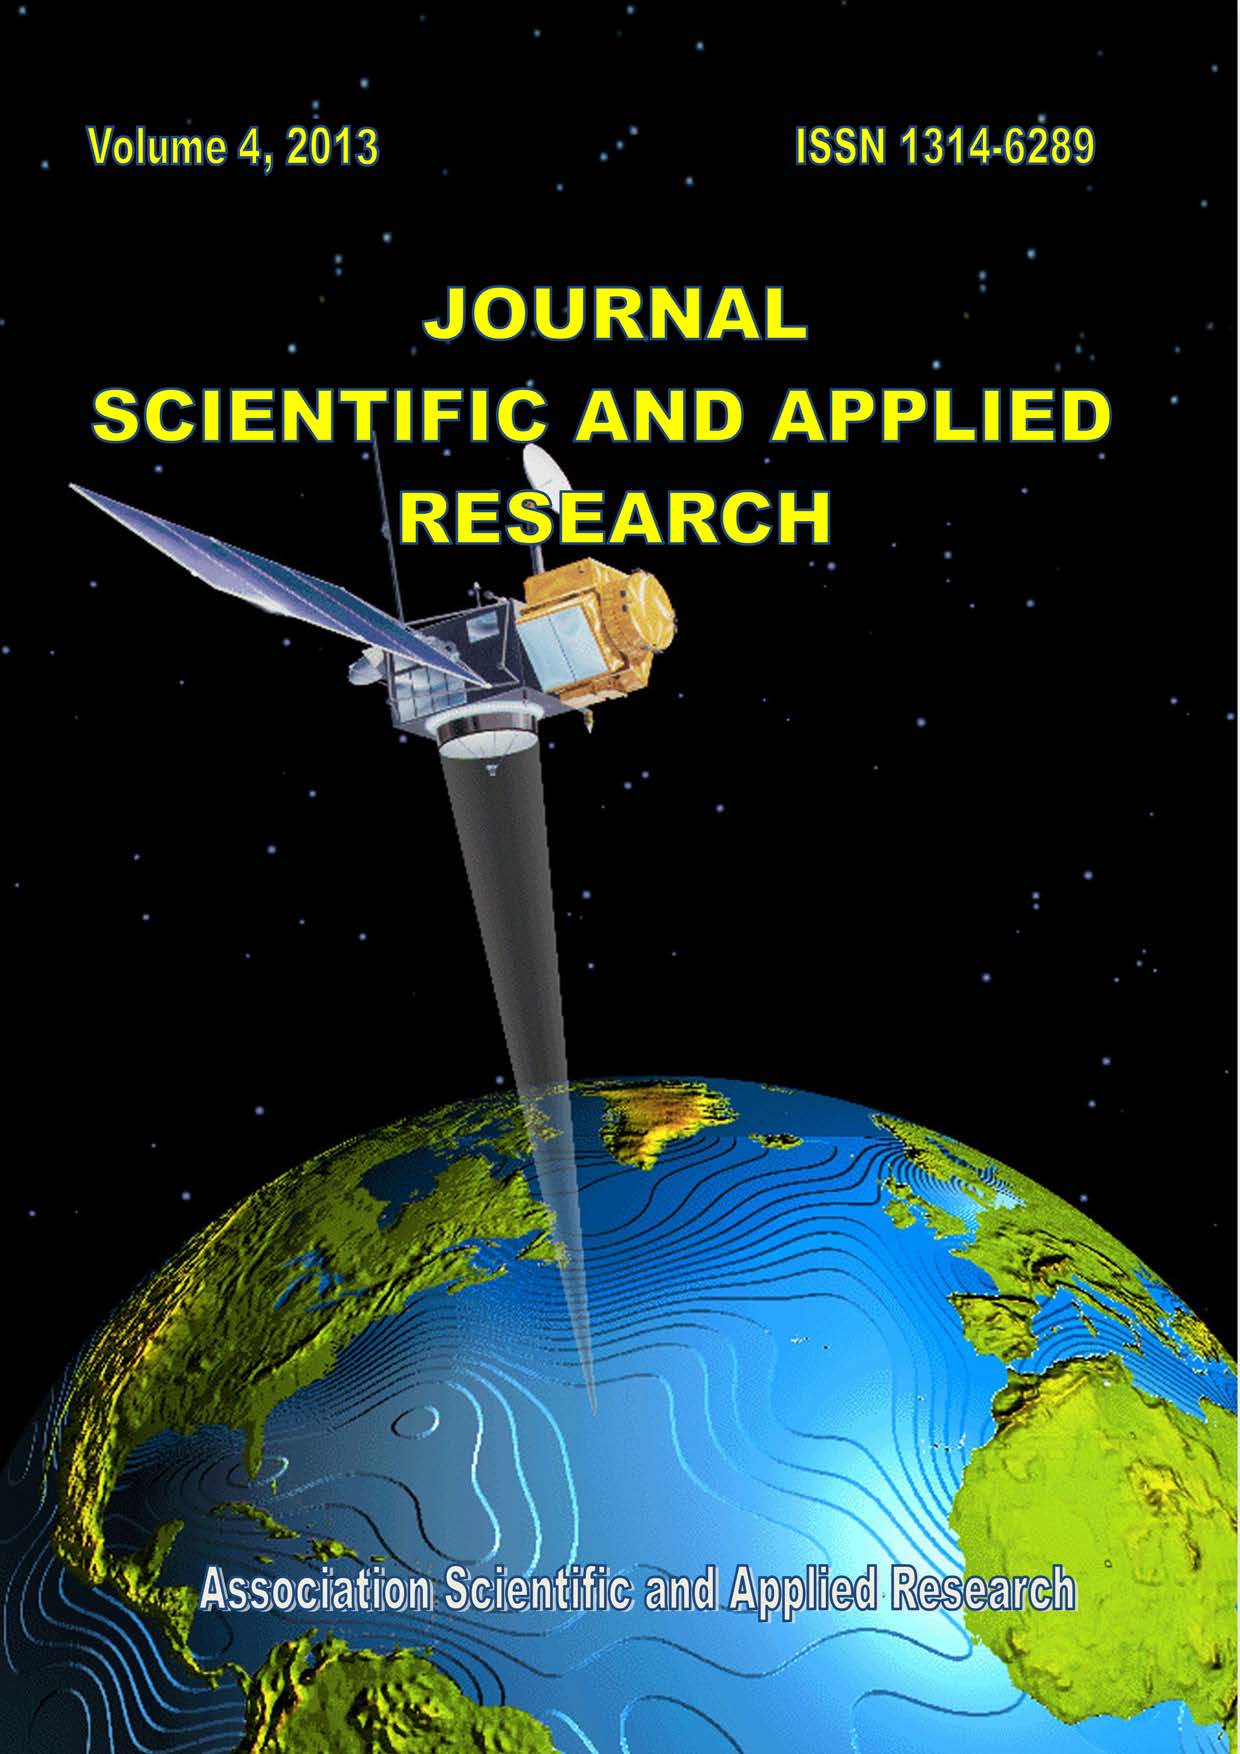 					View Vol. 4 No. 1 (2013): Journal Scientific and Applied Research
				